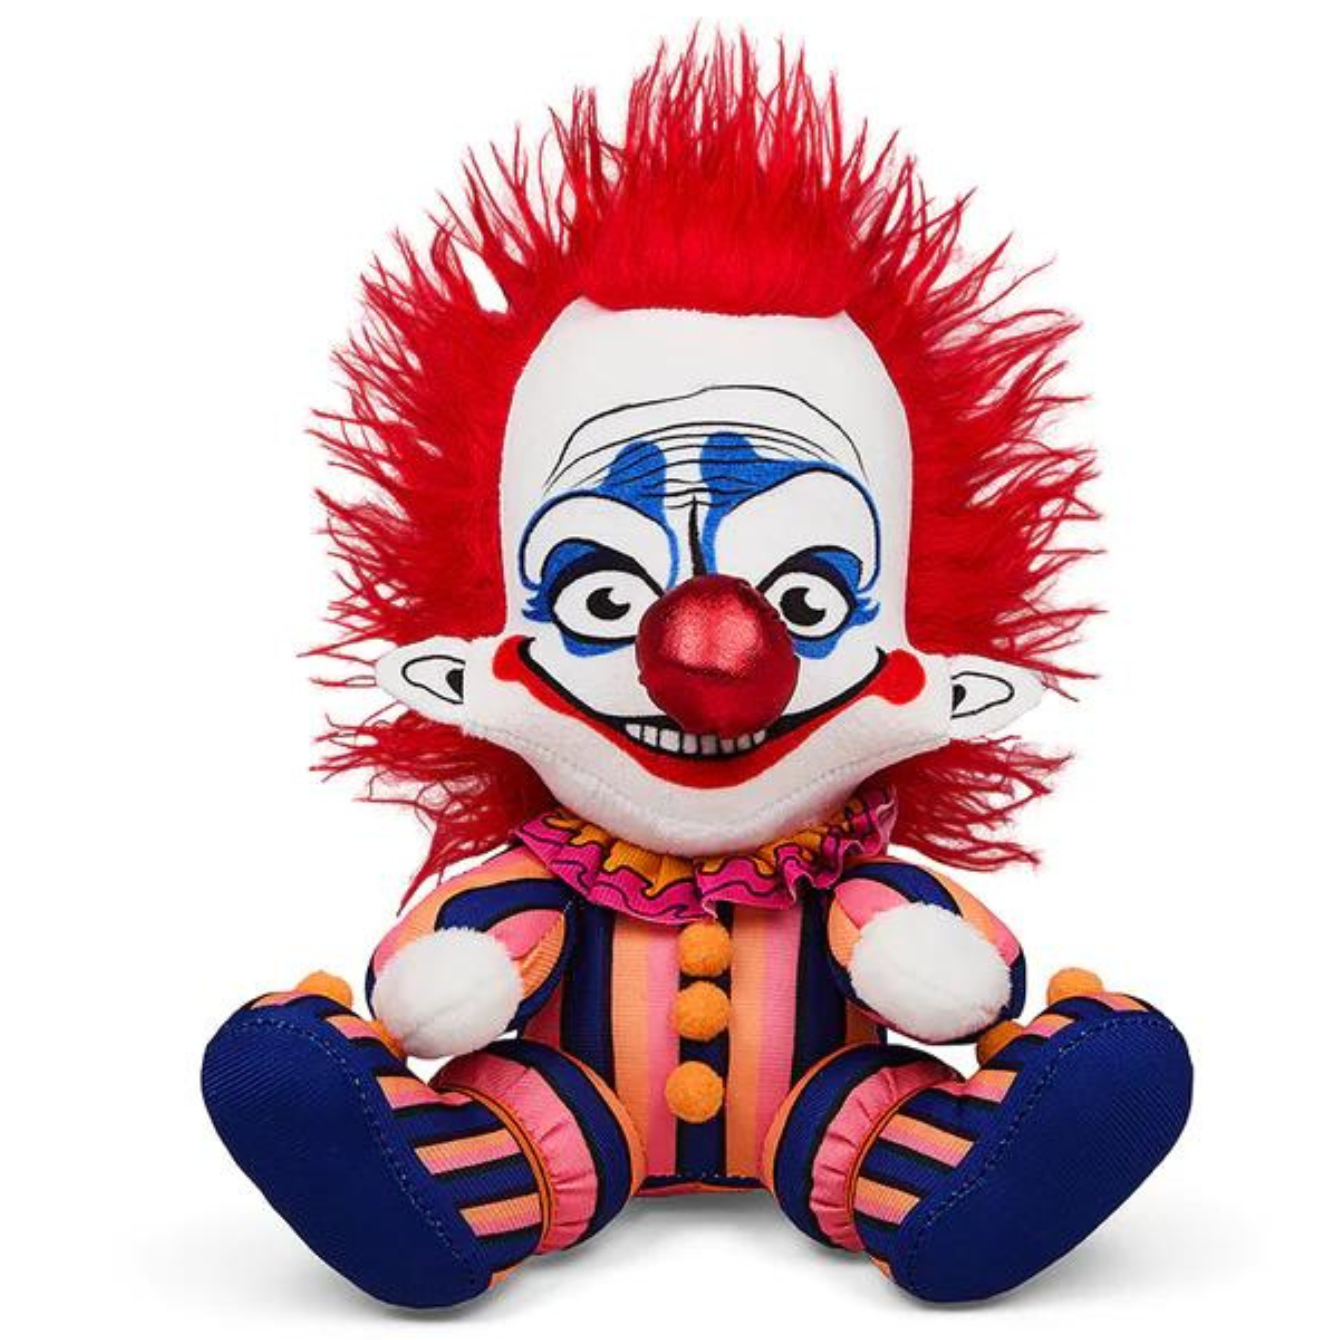 KILLER KLOWNS FROM OUTER SPACE RUDY 8" PHUNNY PLUSH BY KIDROBOT